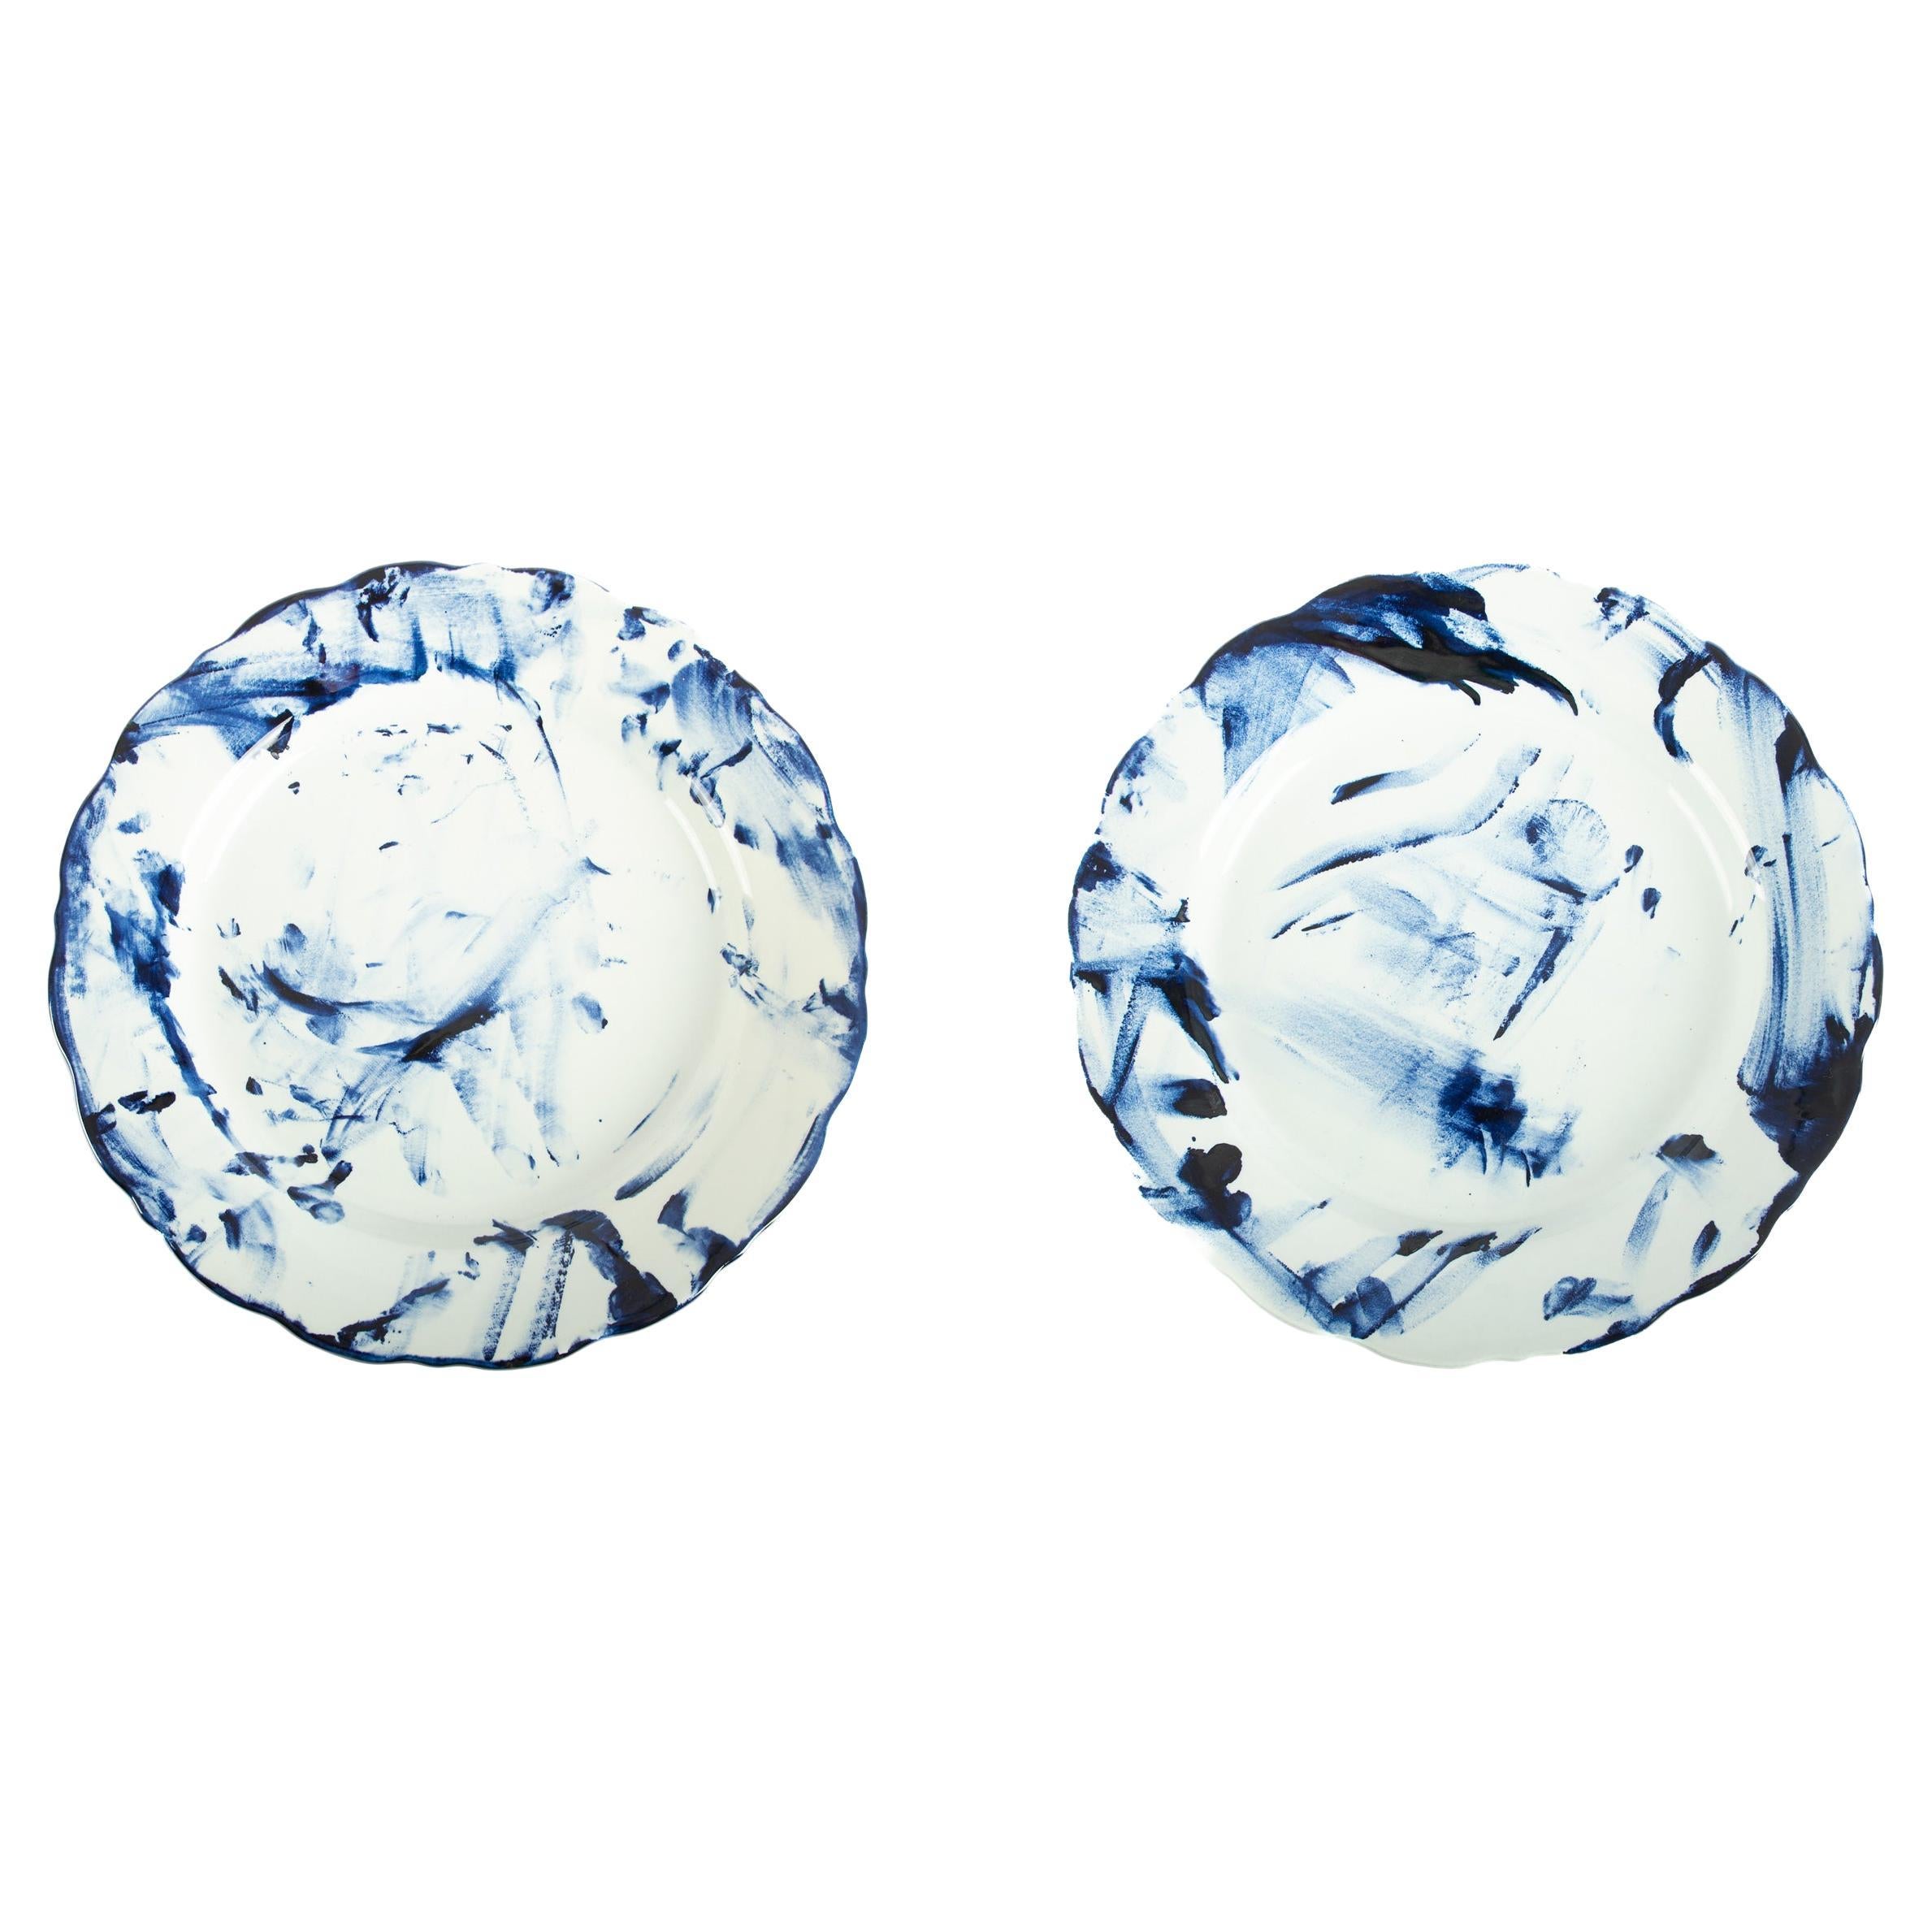 Set of two Delft Blue Plates, by Marcel Wanders, Hand-Painted, 2006, Unique For Sale